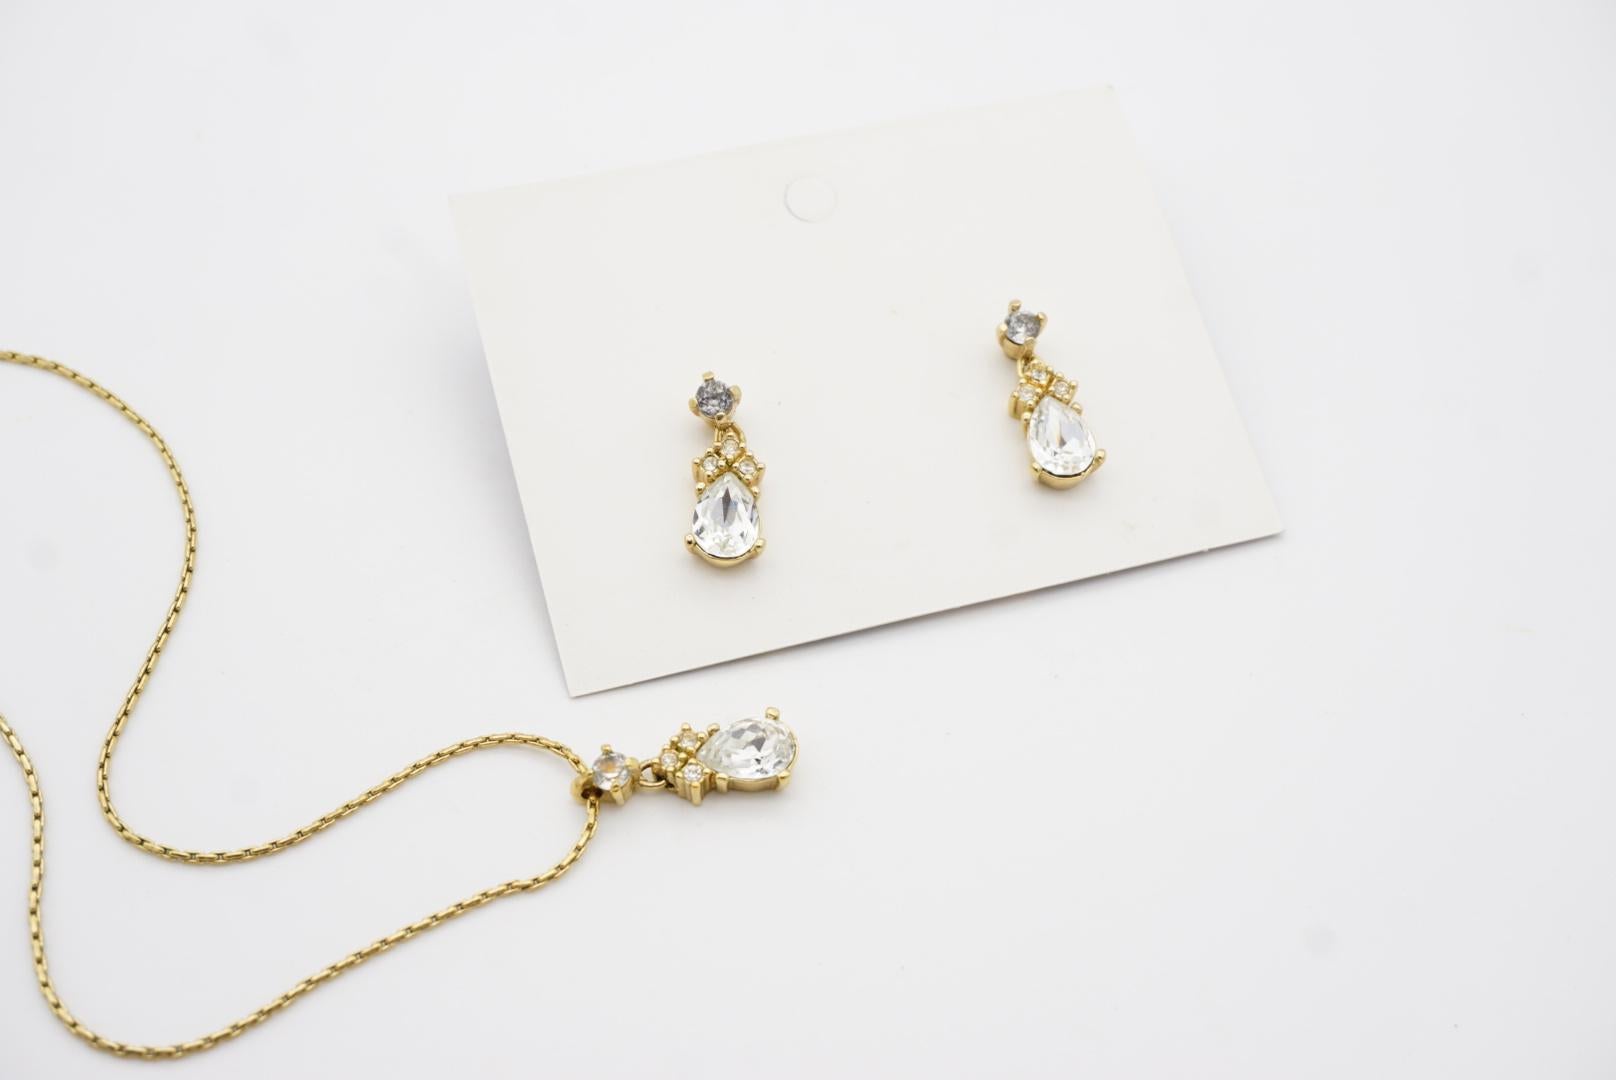 Christian Dior Vintage 1980s Crystal Water Tear Drop Set Gold Necklace Earrings For Sale 3